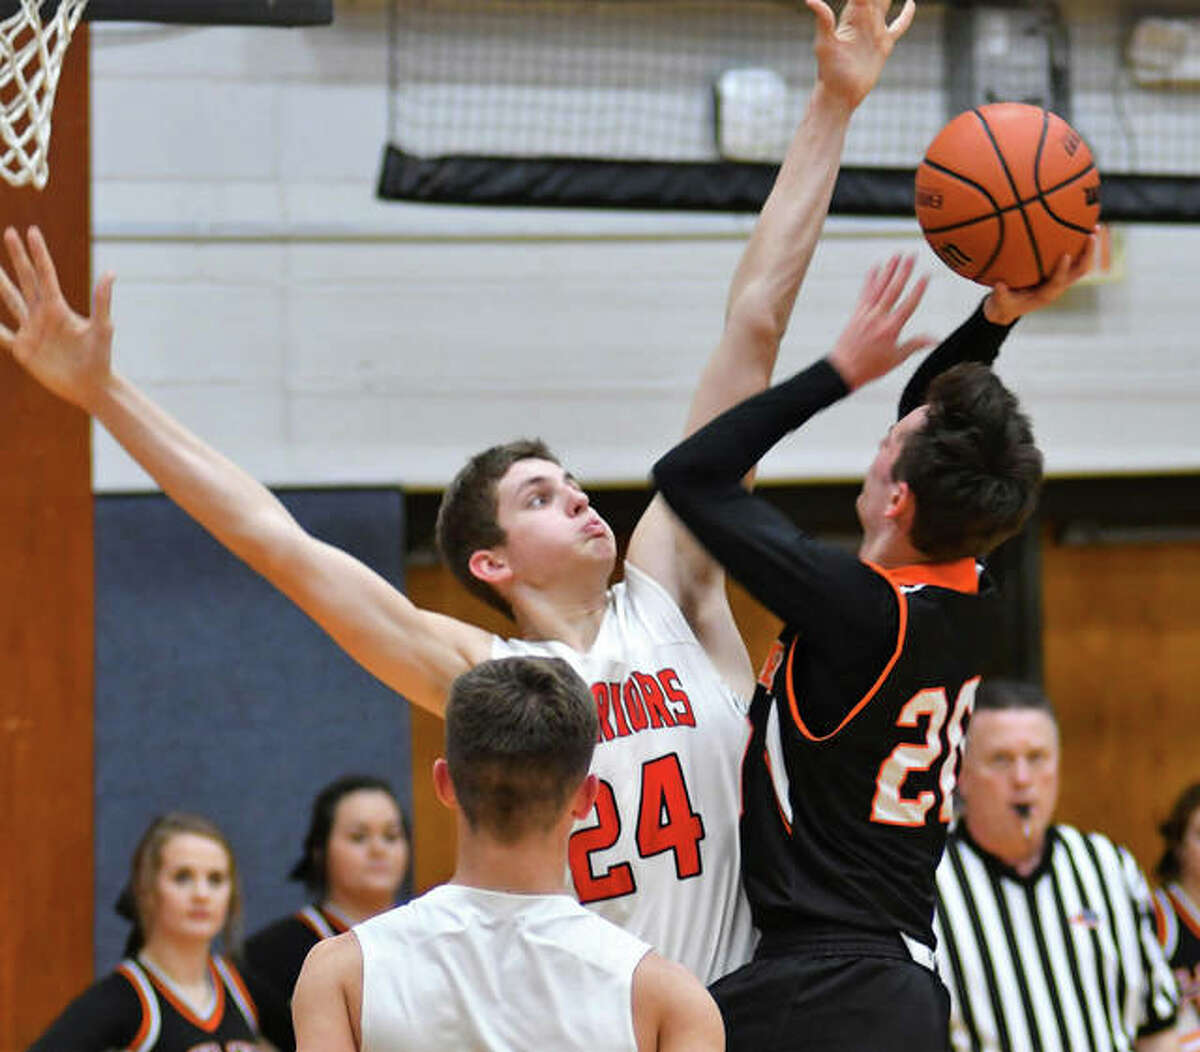 Calhoun’s Ben Eberlin (24) scored 11 points in his team’s victory over Gillespie Tuesday night. He is shown in action earlier this season against Hillsboro.